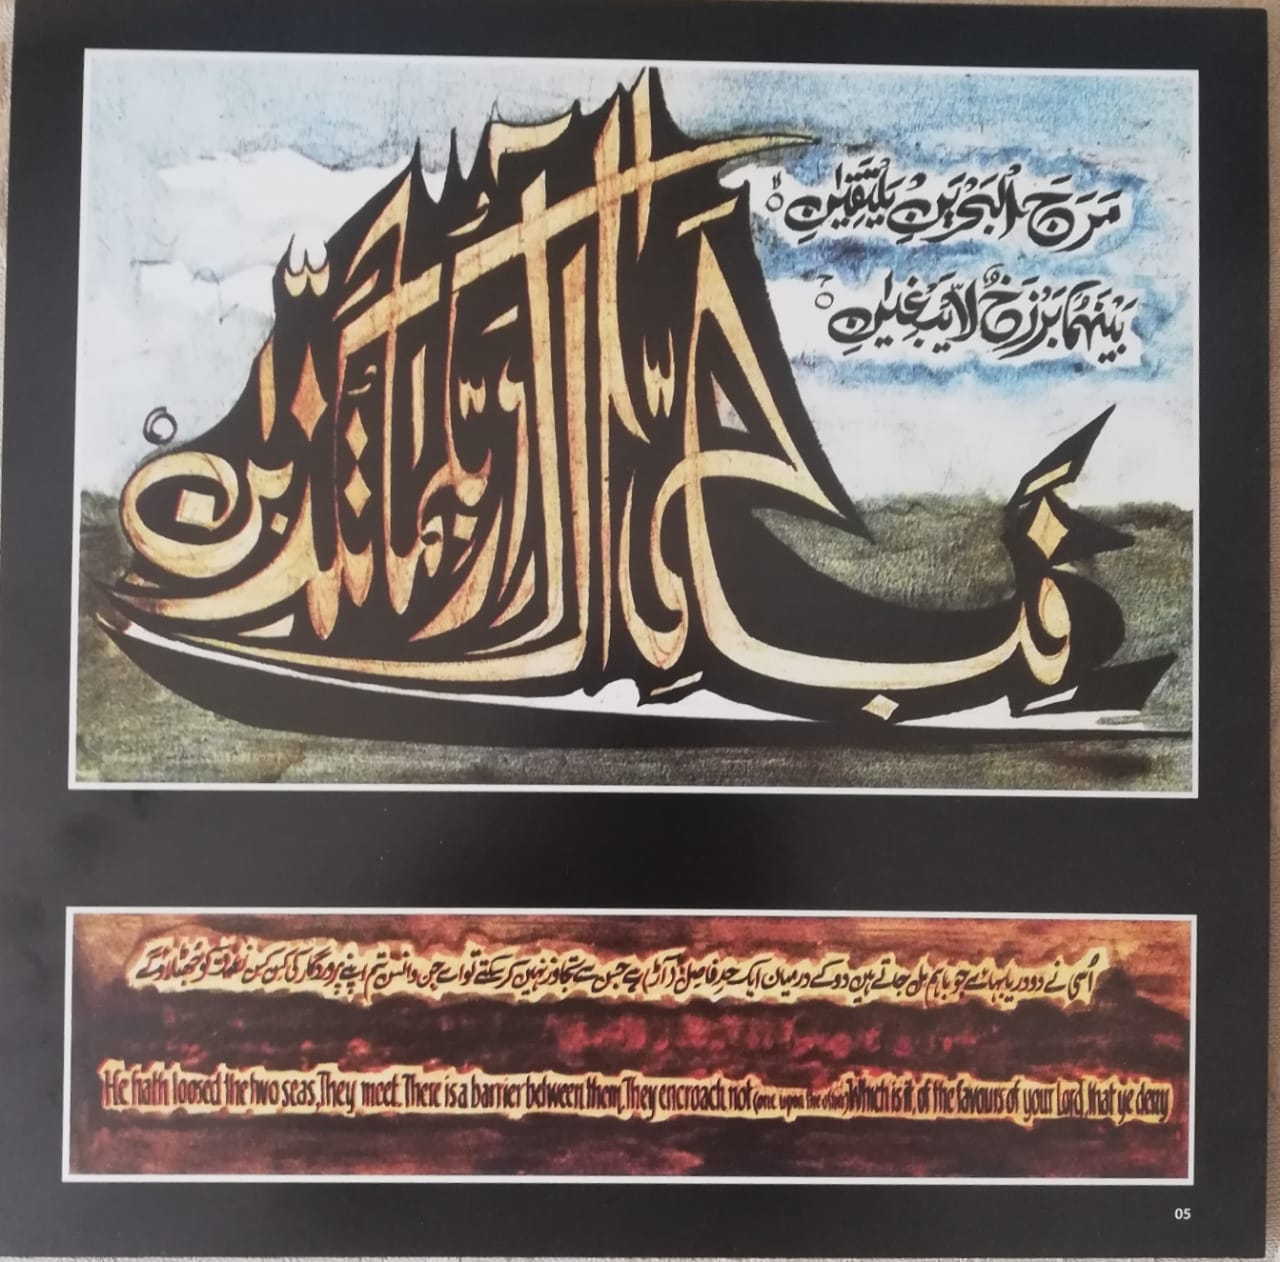 Original Surah–E–Rahman as painted by Sadequain in 1970 and currently displayed at the National School of Public Policy (Lahore)